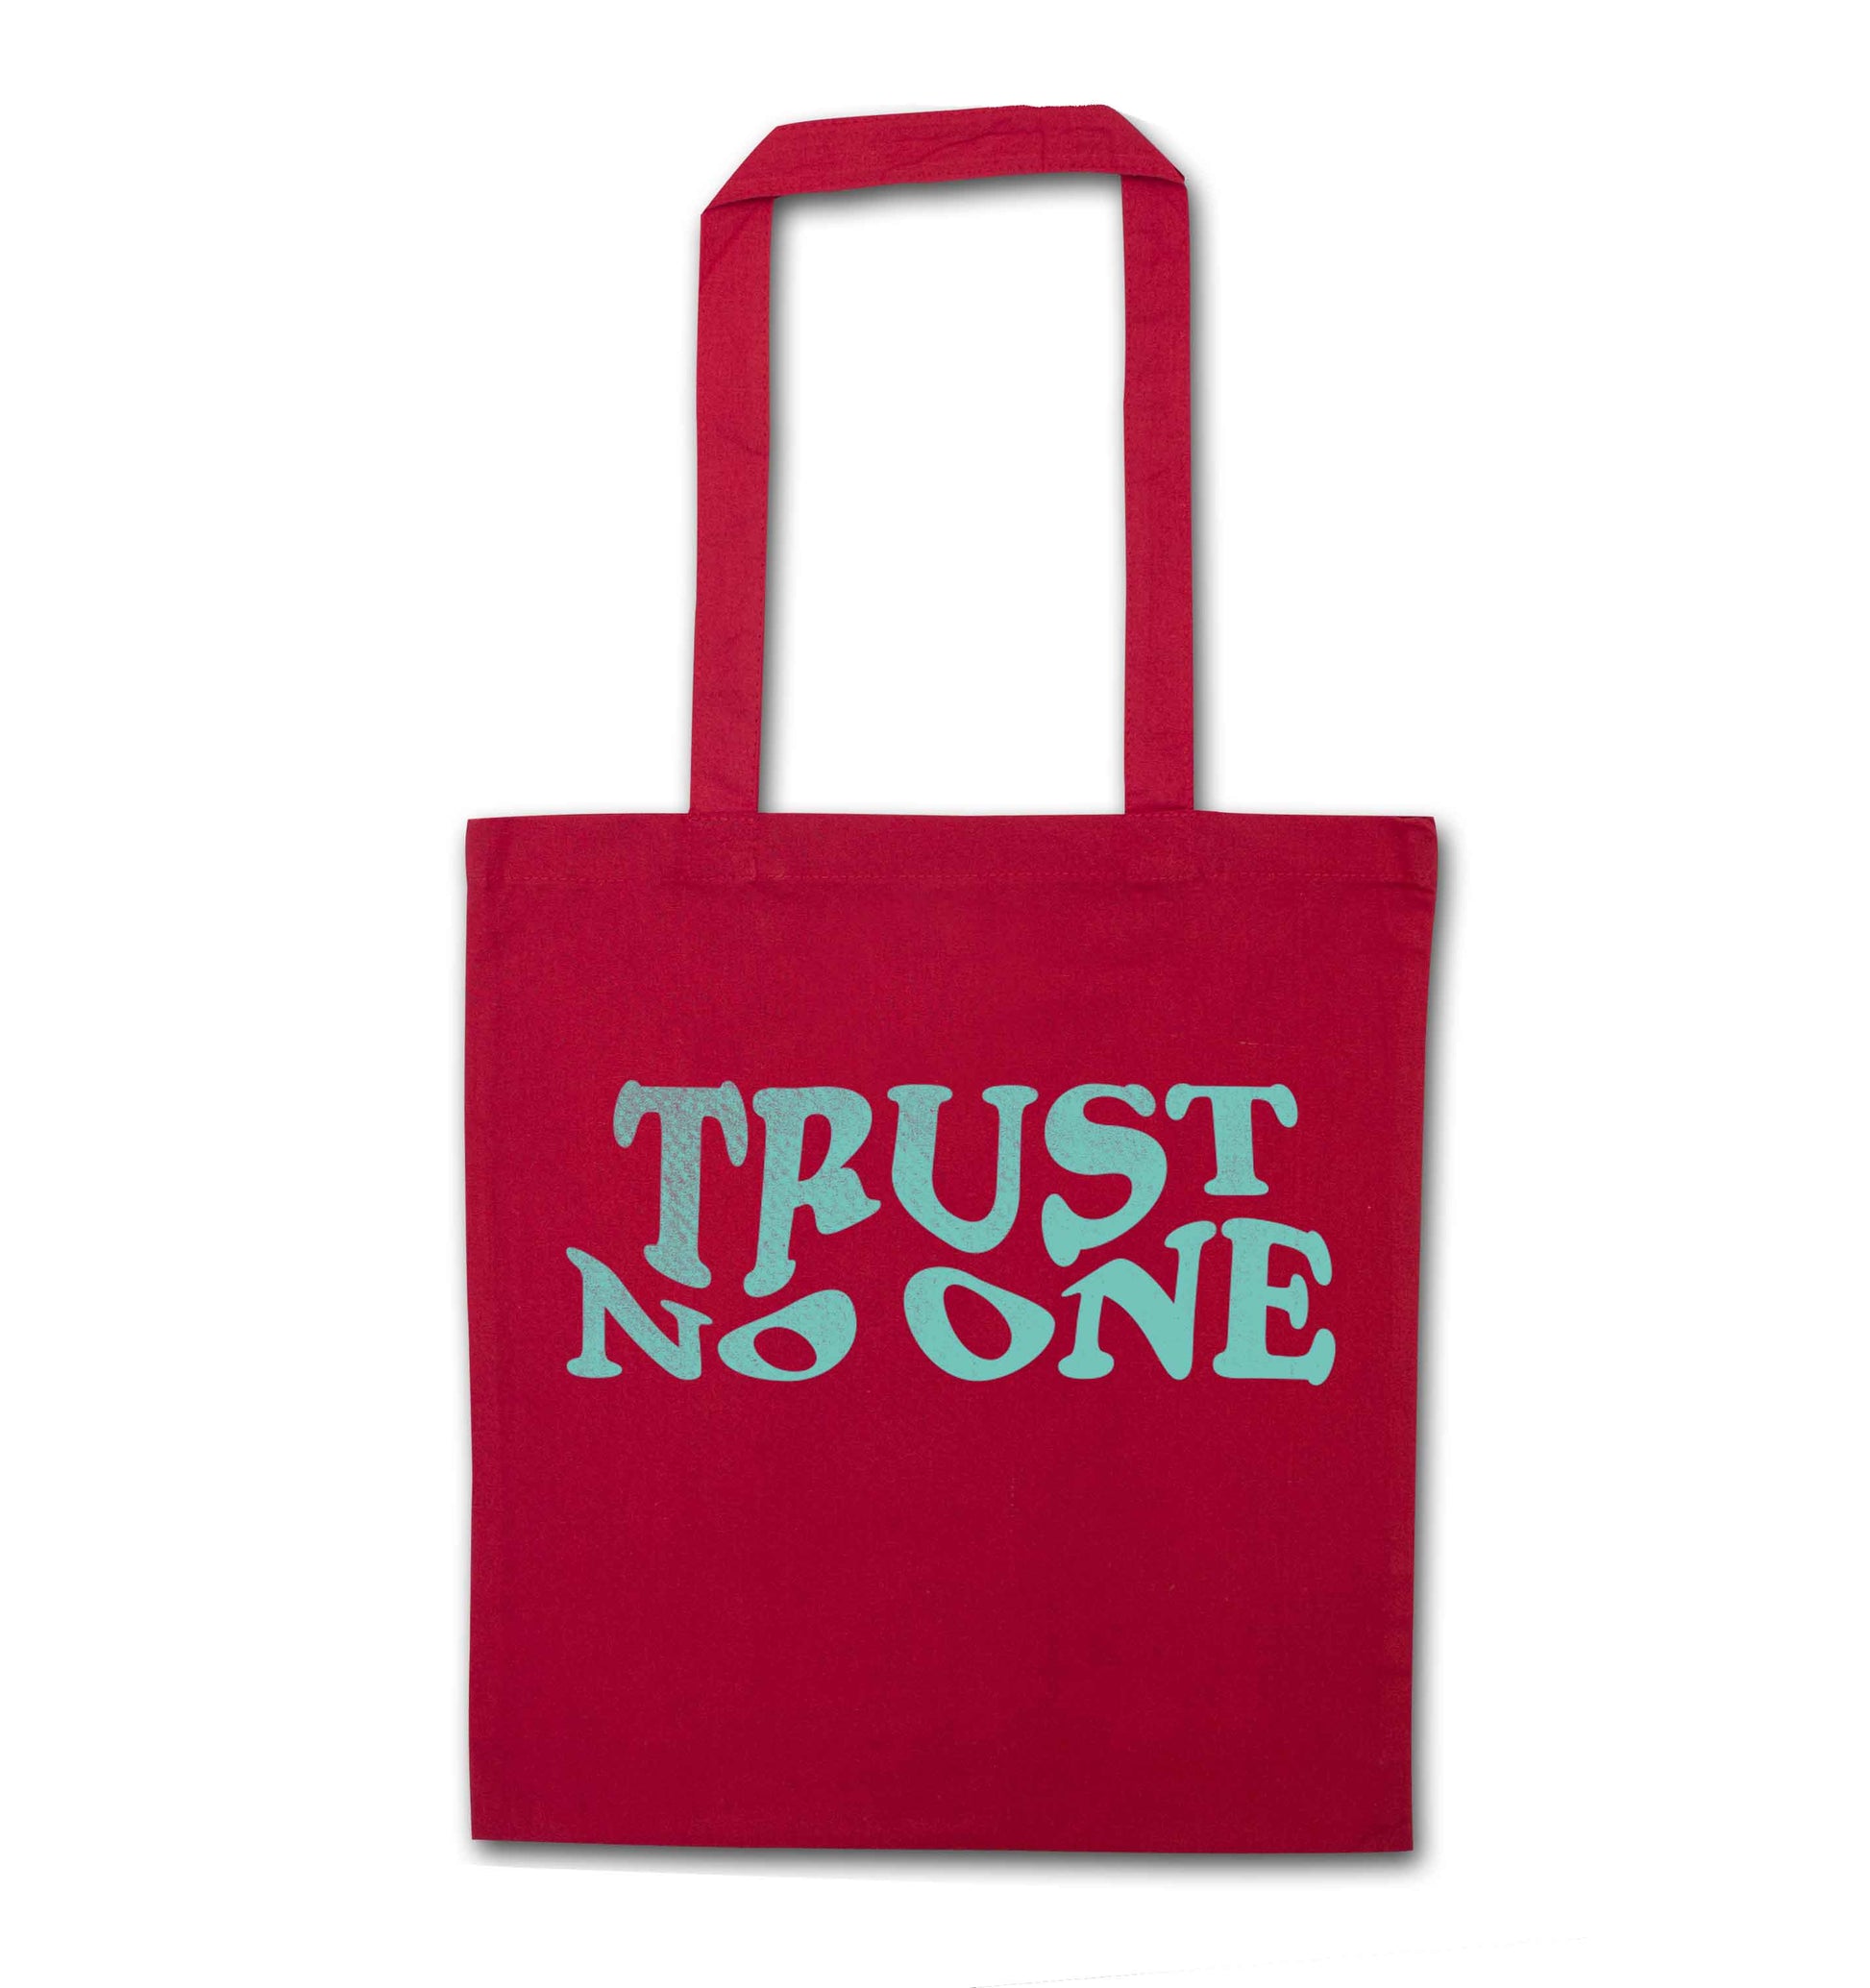 Trust no one red tote bag